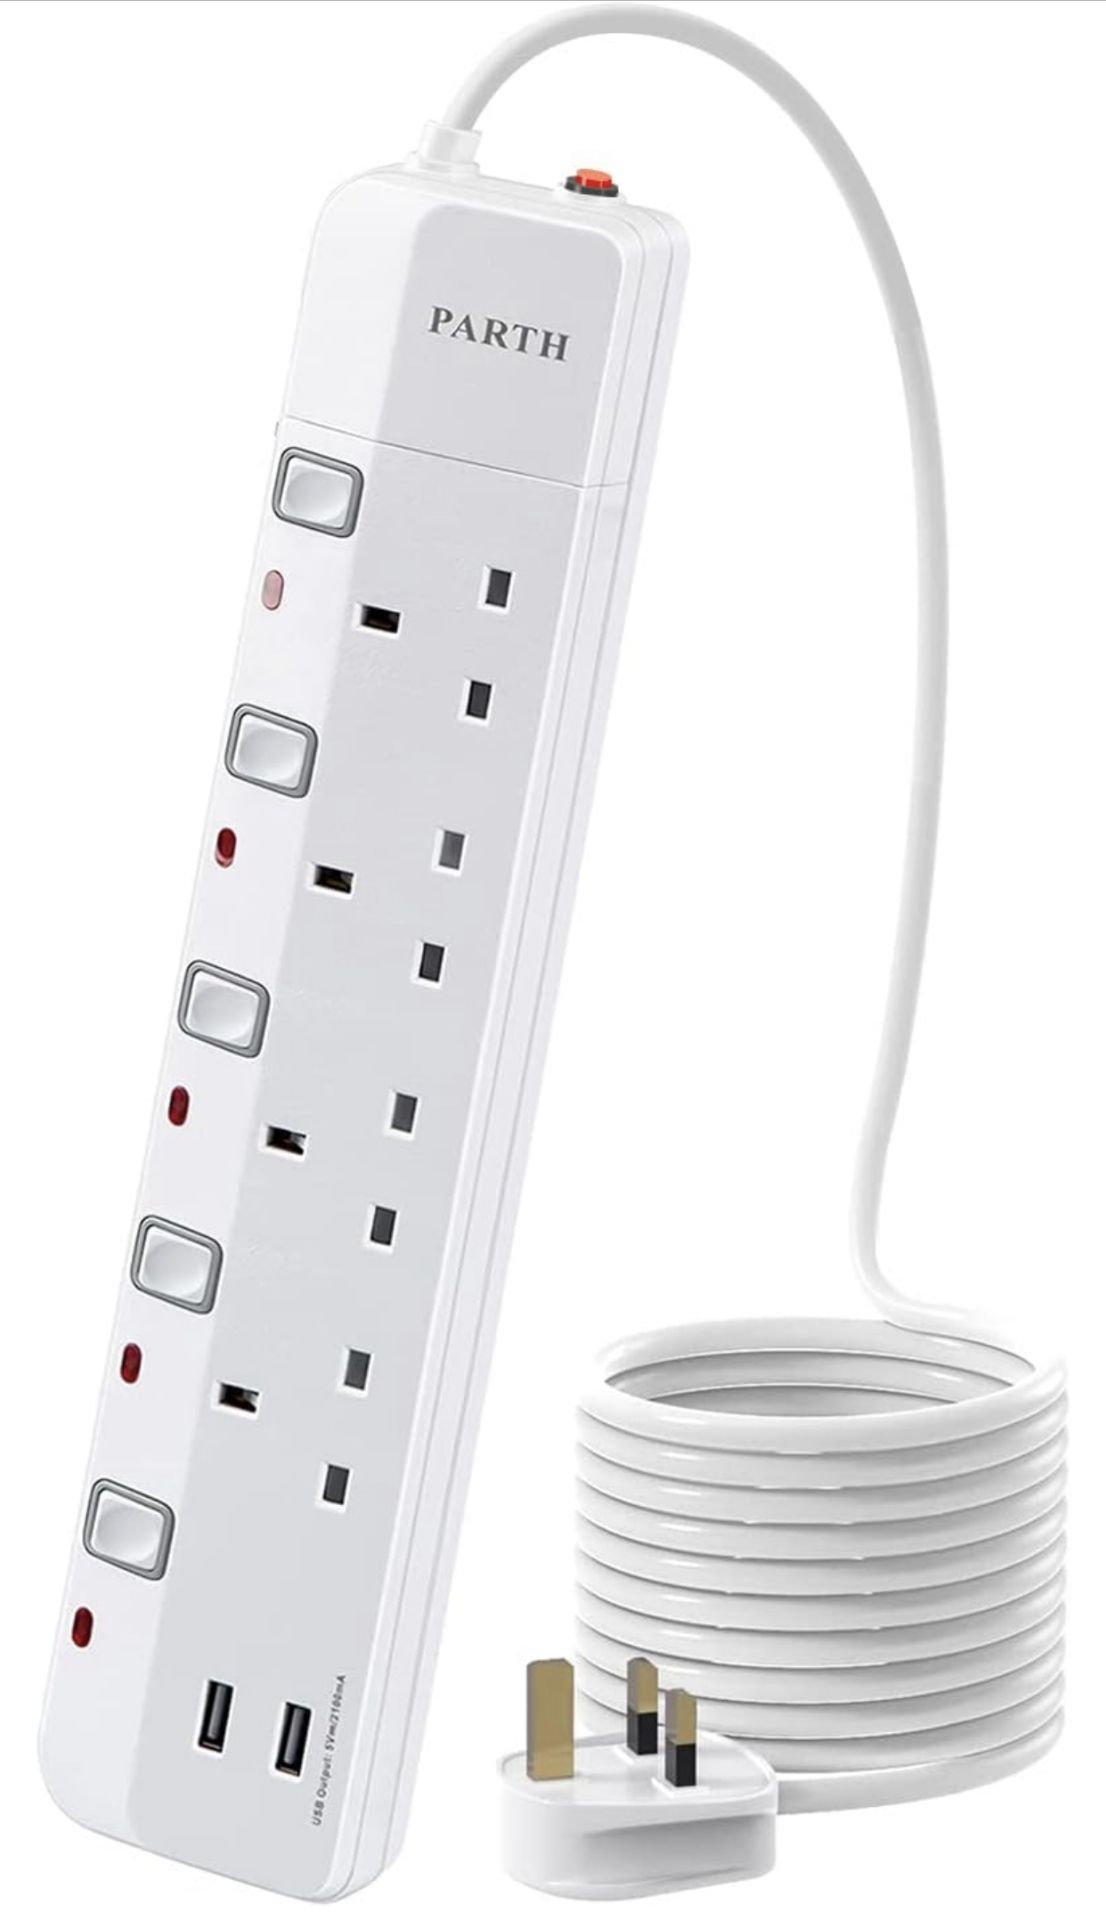 RRP £21.99 Parth Surge Protected Extension Lead with USB Slots 3m Long Cord Extension Cable 4 Way